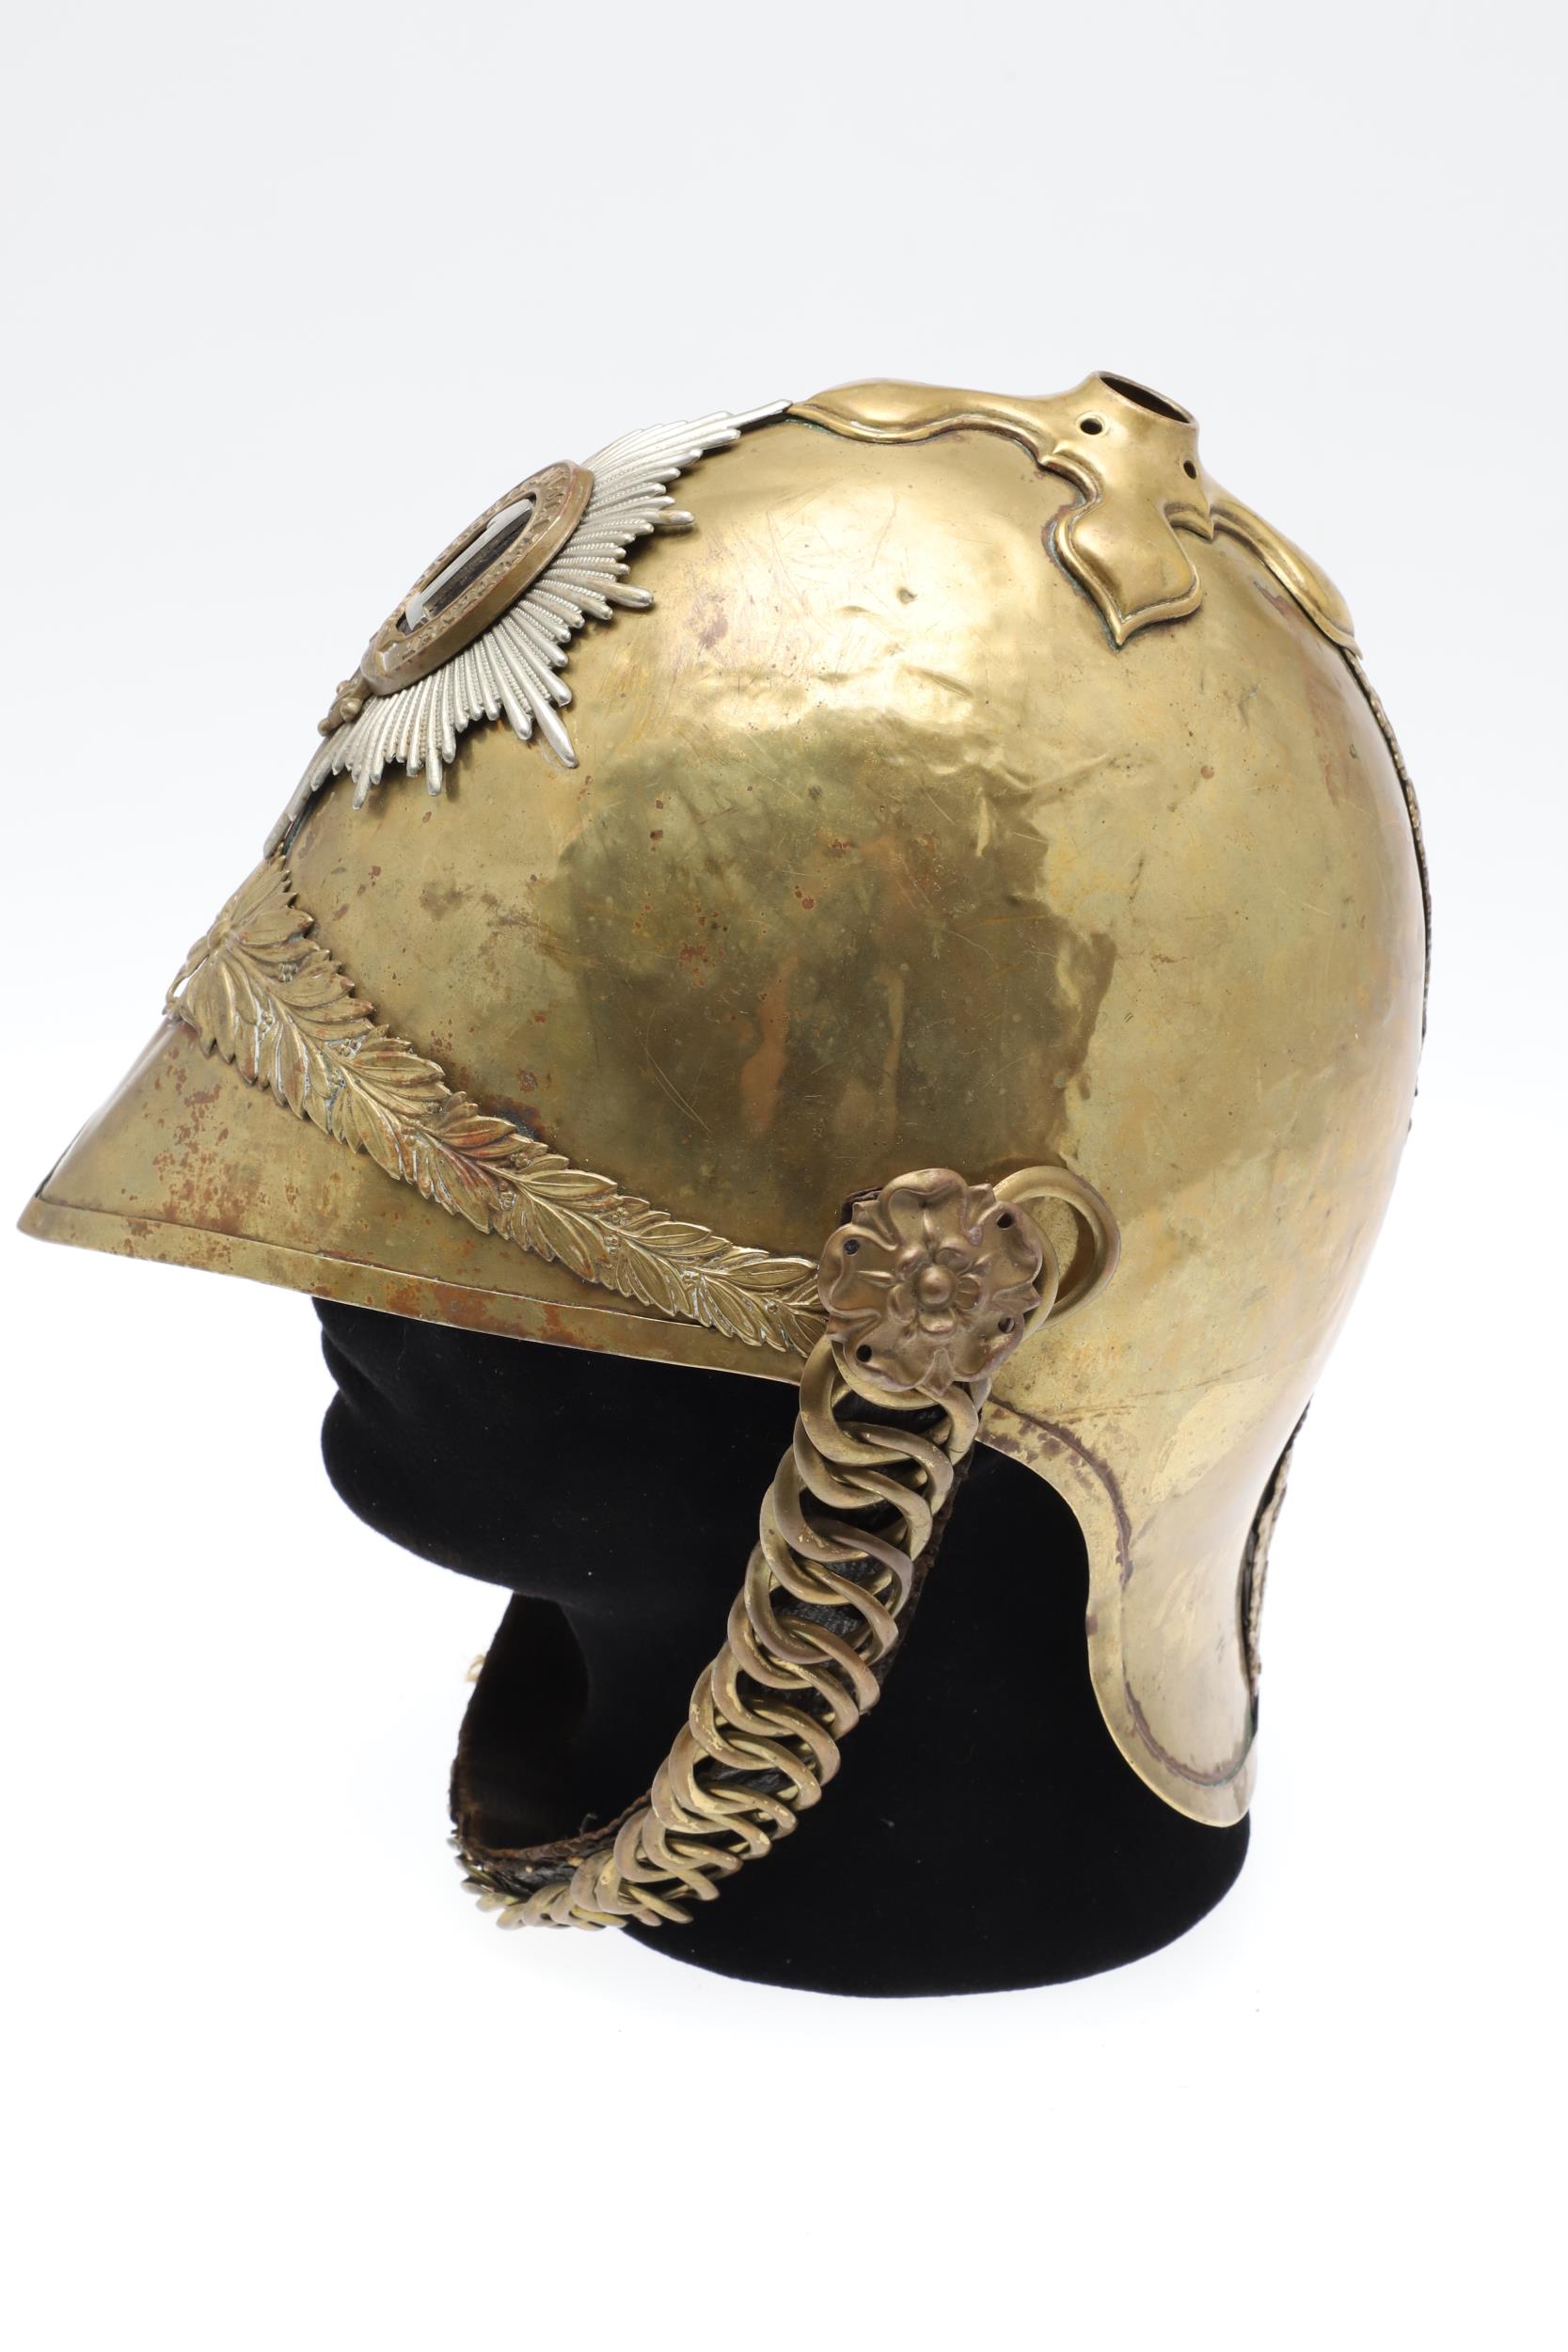 A 1ST DRAGOON GUARDS 1871 PATTERN HELMET. - Image 5 of 15